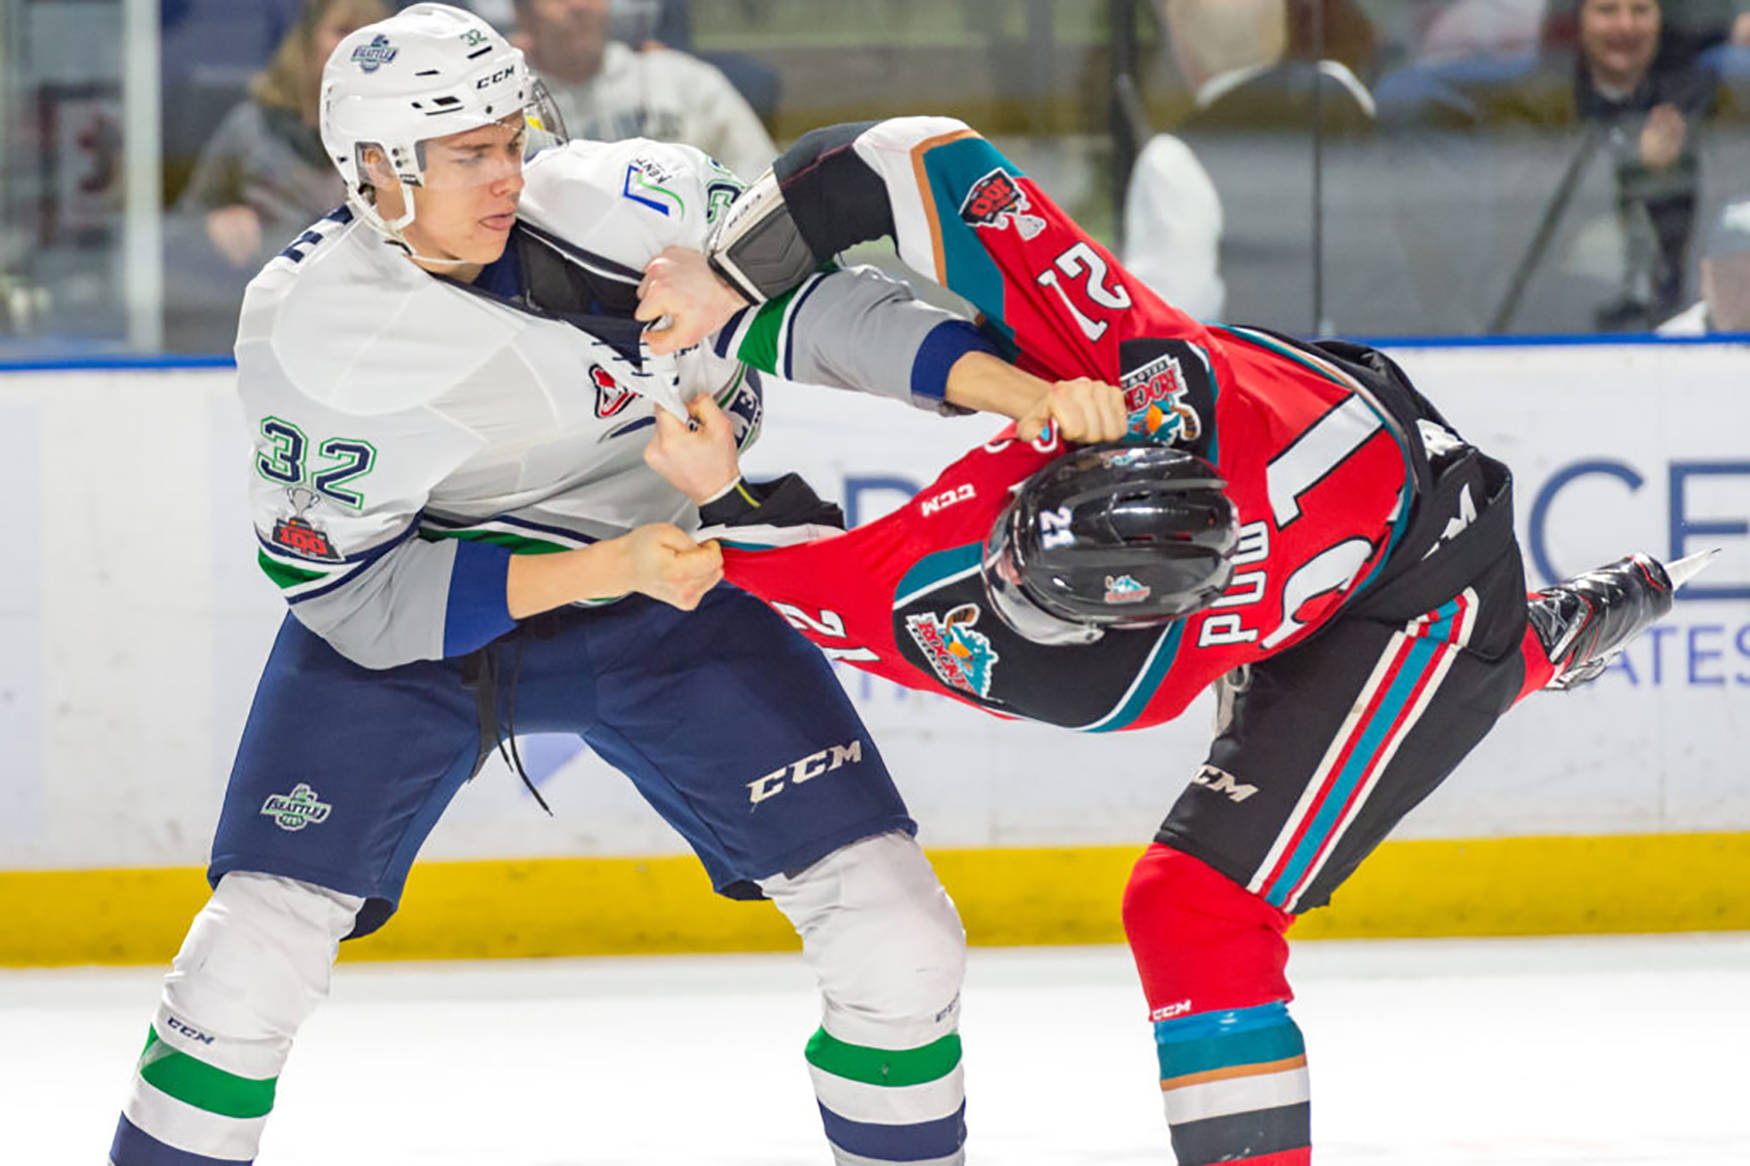 The Thunderbirds’ Mike MacLean, left, scuffles with the Rockets’ Kyle Pow during WHL play Friday night at the accesso ShoWare Center. COURTESY PHOTO, Brian Liesse/T-Birds